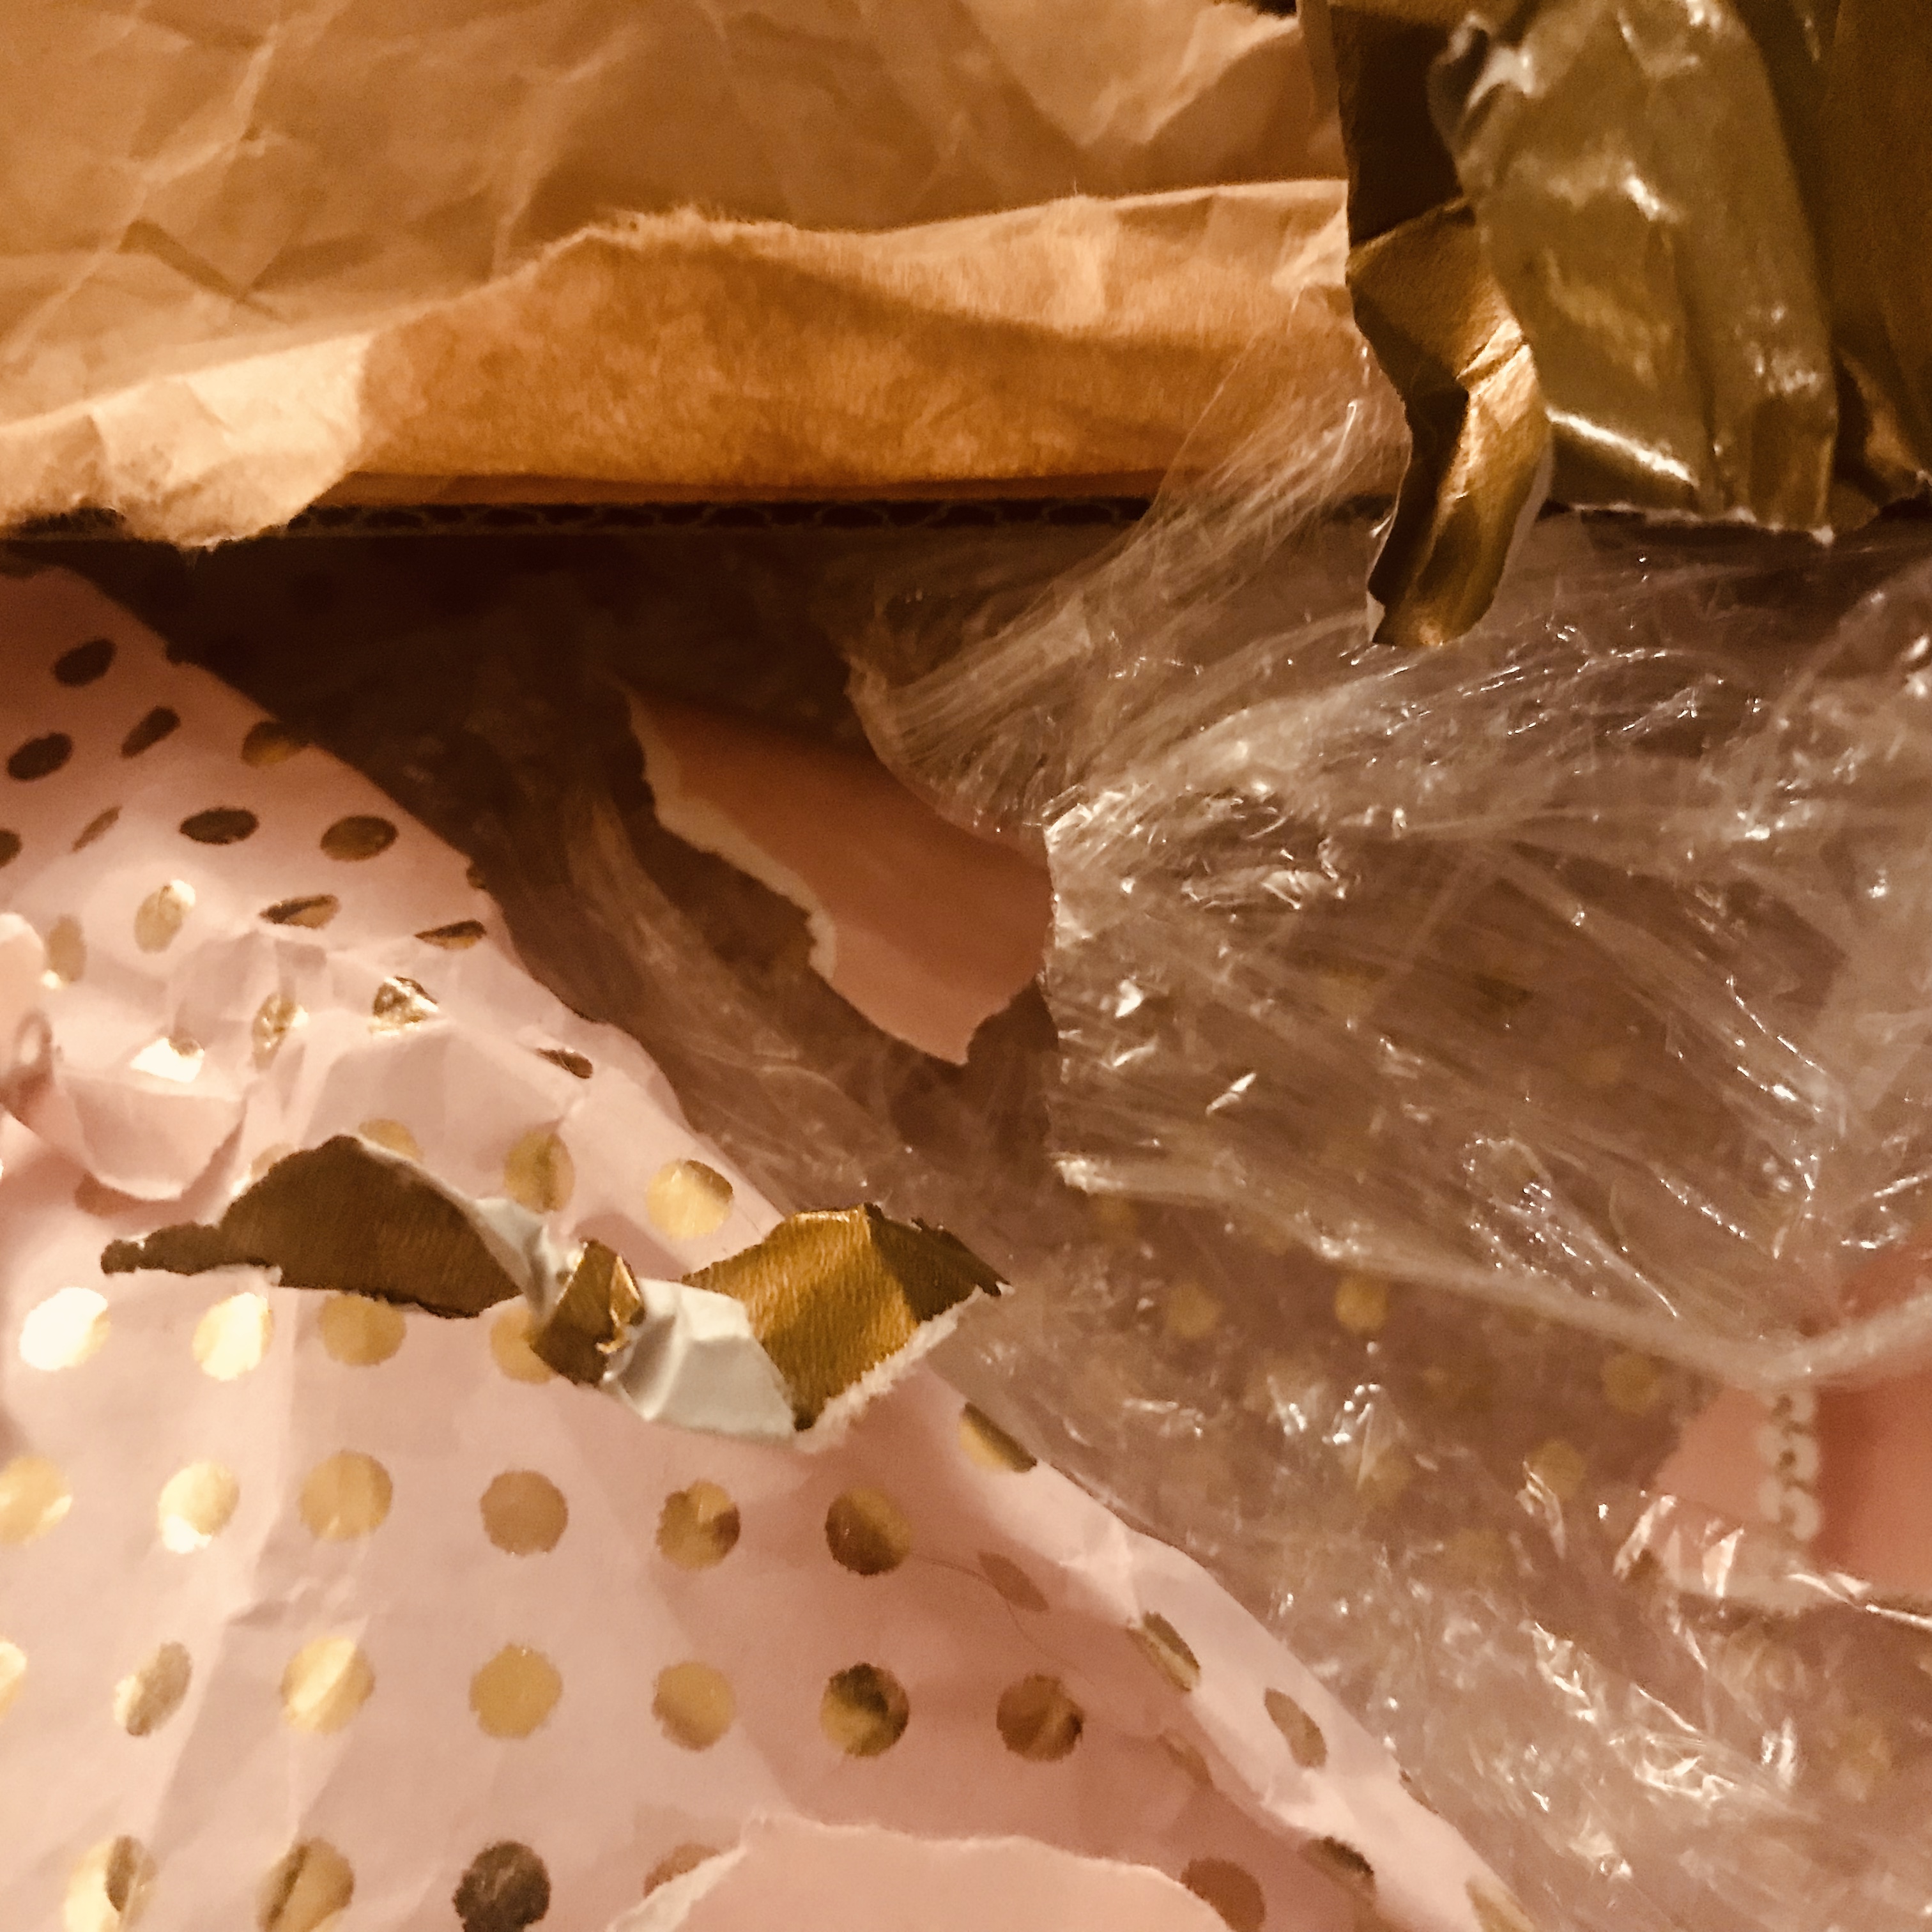 (A final image with no text, just wrapping paper, cellophane, and thick brown paper.)